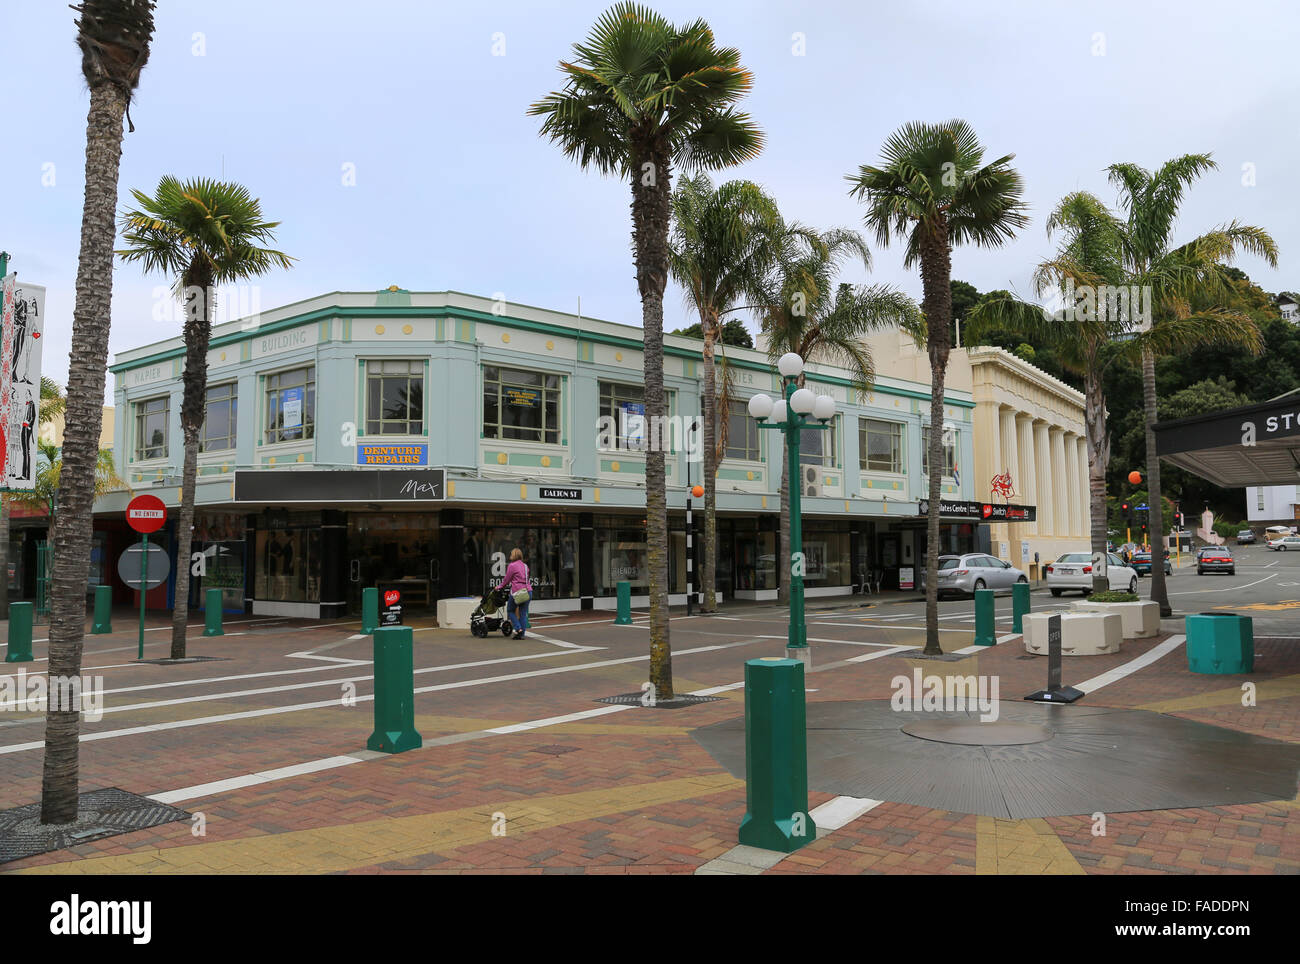 The Napier Building, an example of art deco architecture, in downtown Napier, Hawke's Bay, New Zealand. Stock Photo